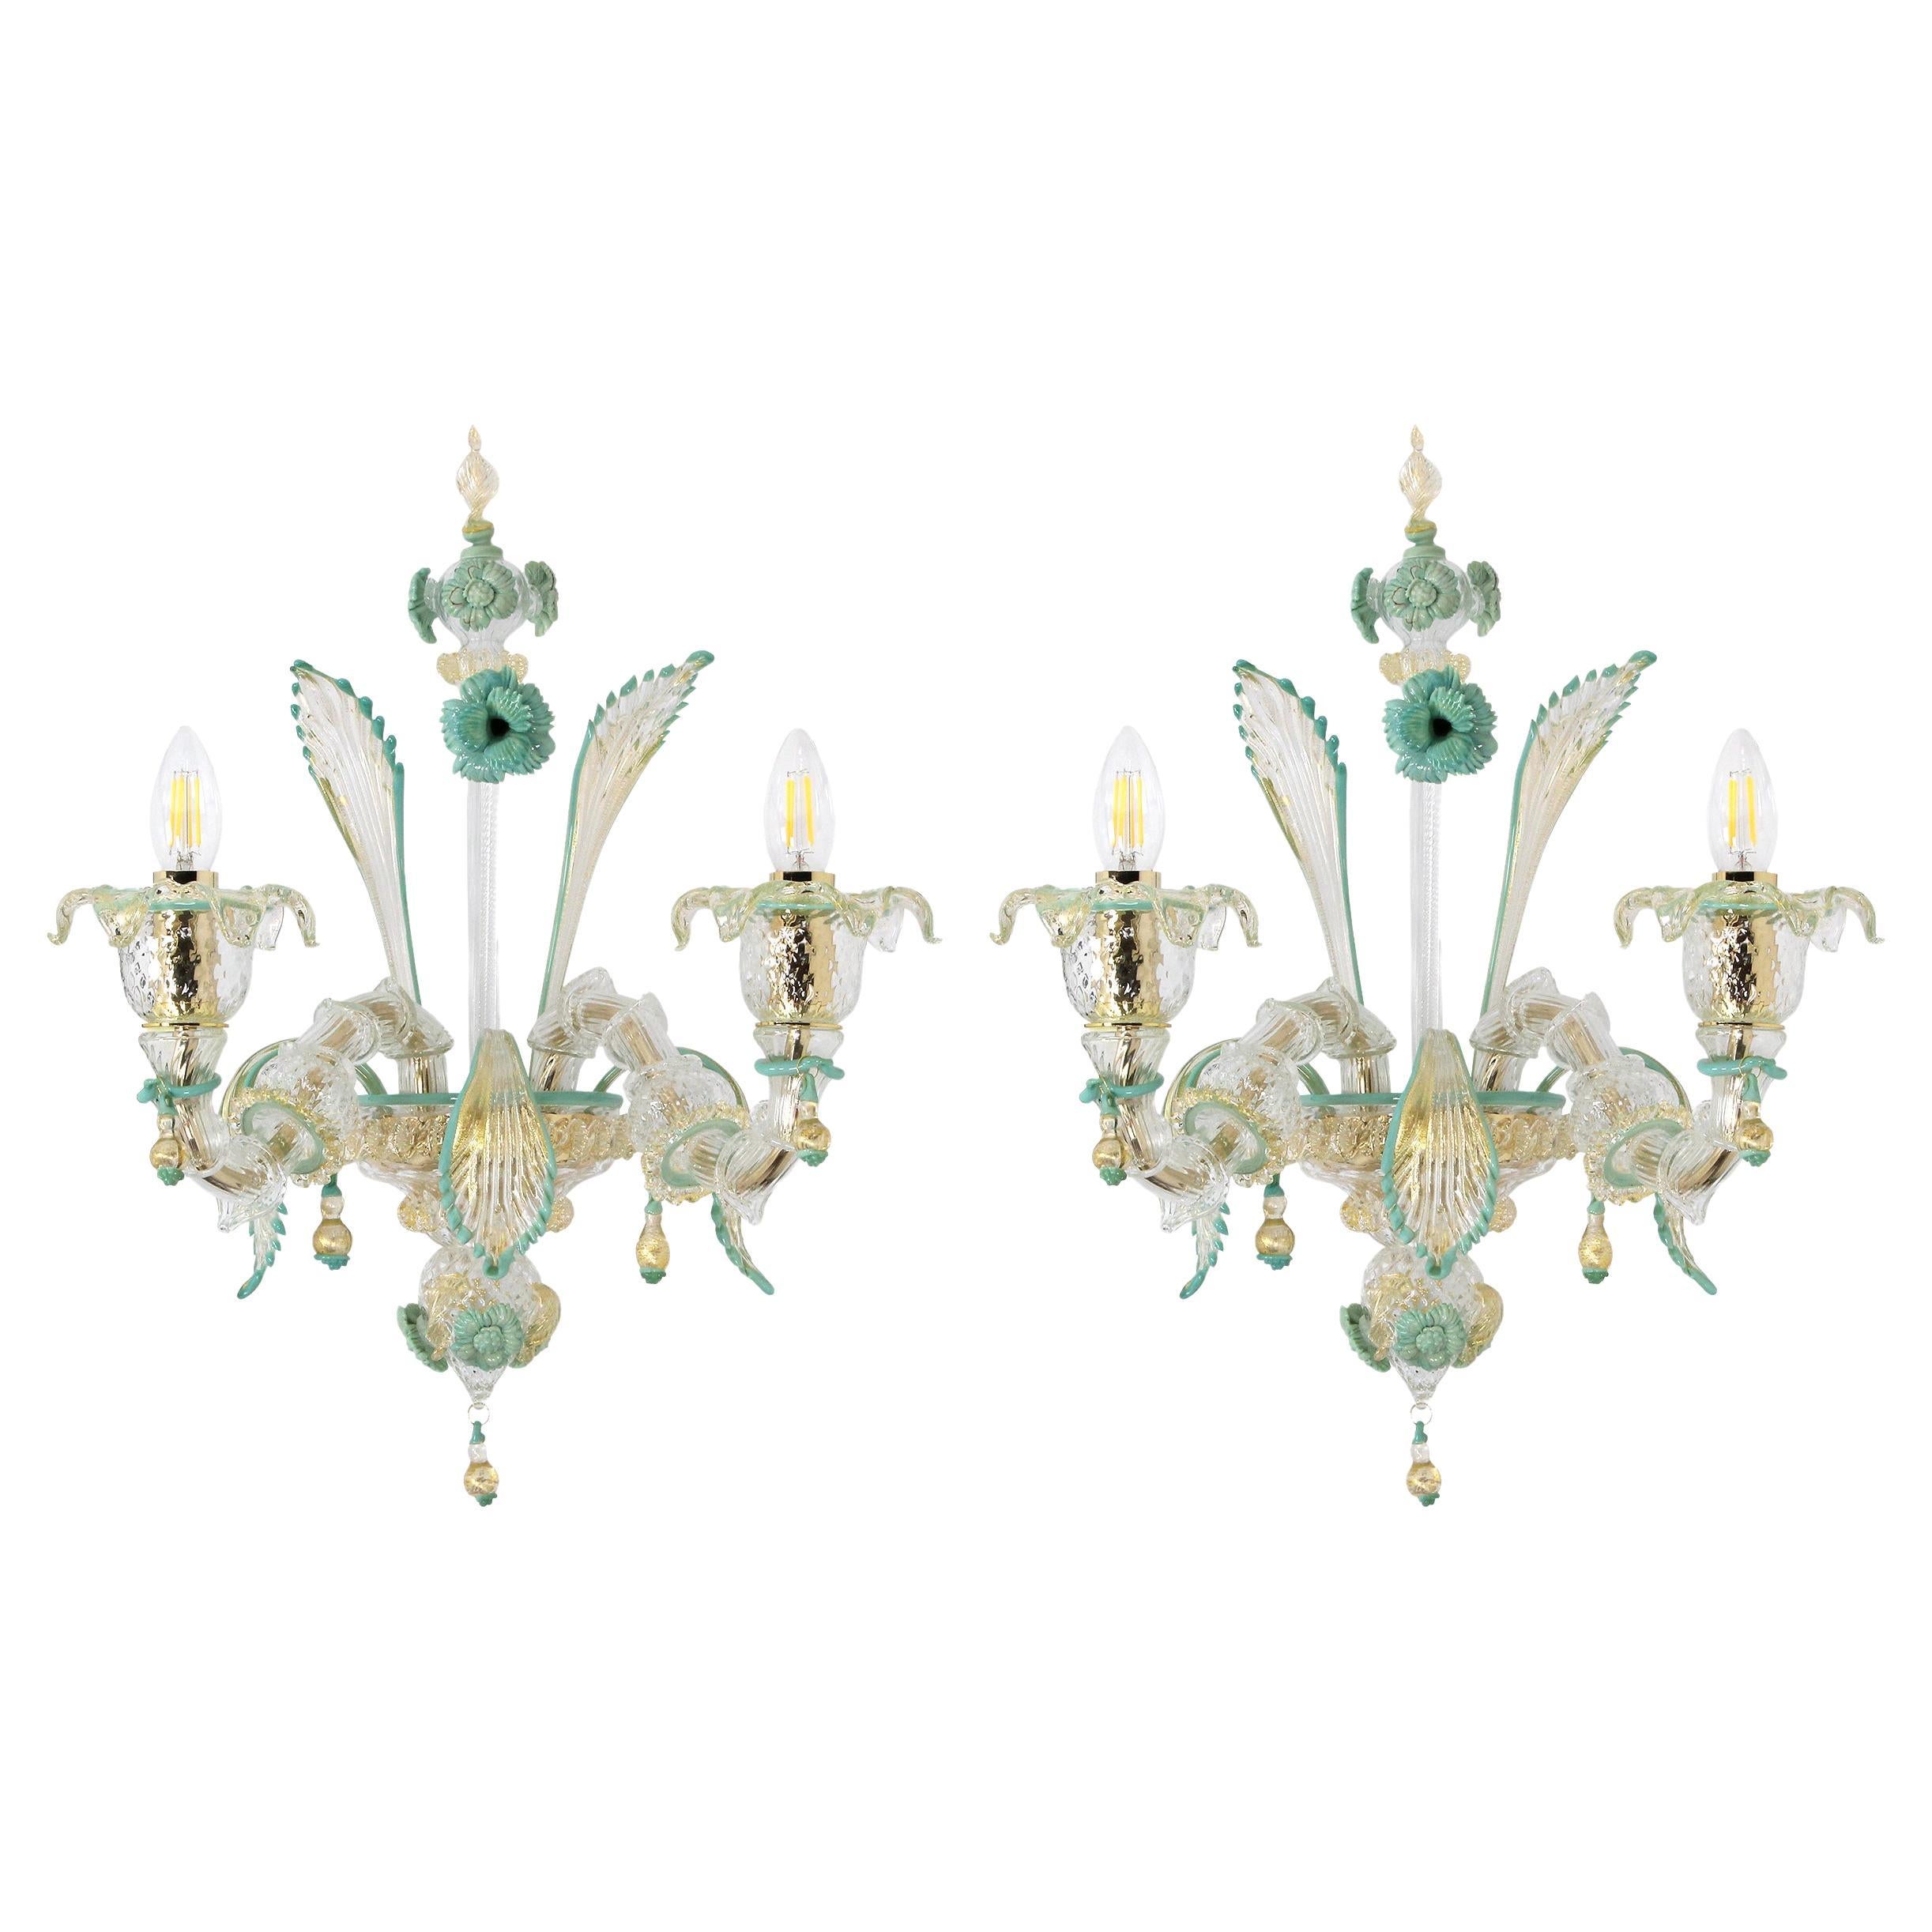 Set of 2 Rezzonico Sconce 2 Arms, Clear-multicolour Murano Glass by Multiforme   For Sale